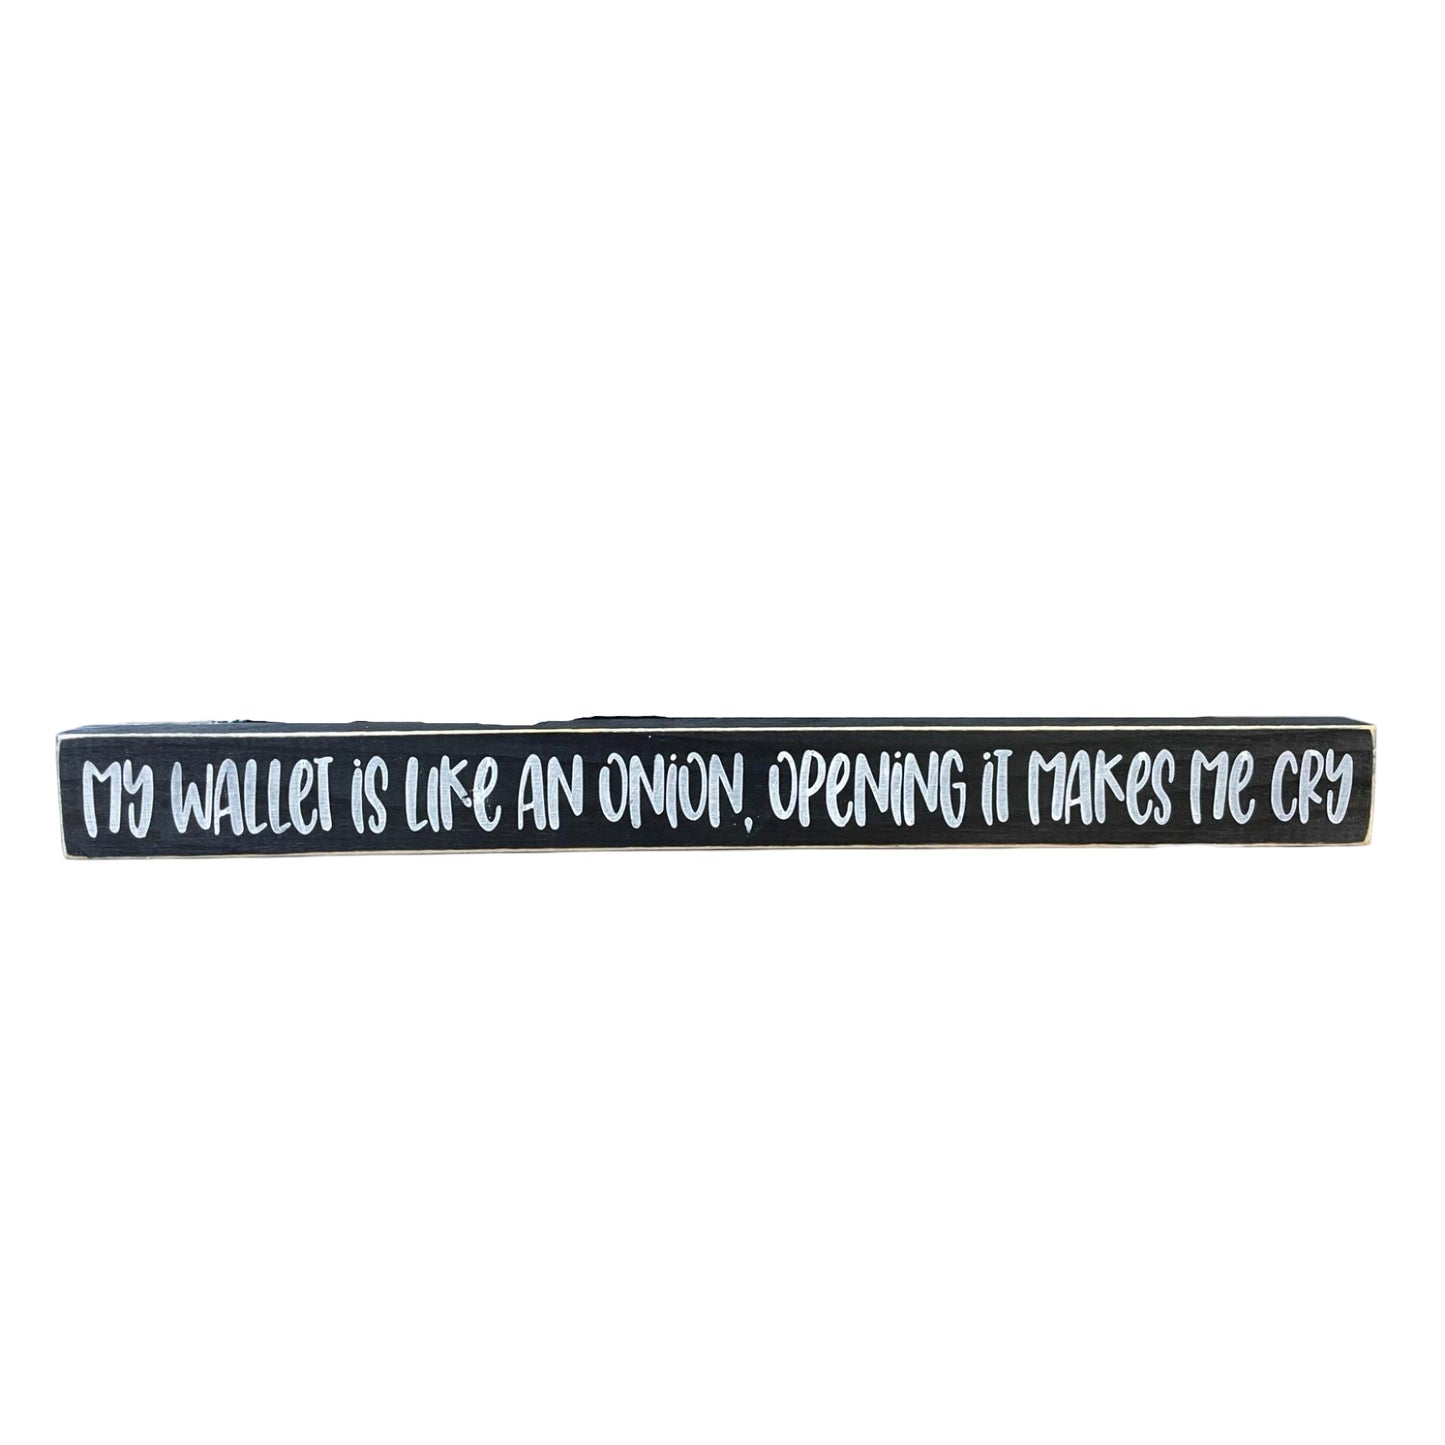 Handpainted black wood sign with white text reading 'My Wallet Is Like An Onion, Opening Makes Me Cry,' freestanding 16-inch funny wood sign with a money joke for home or office decor.